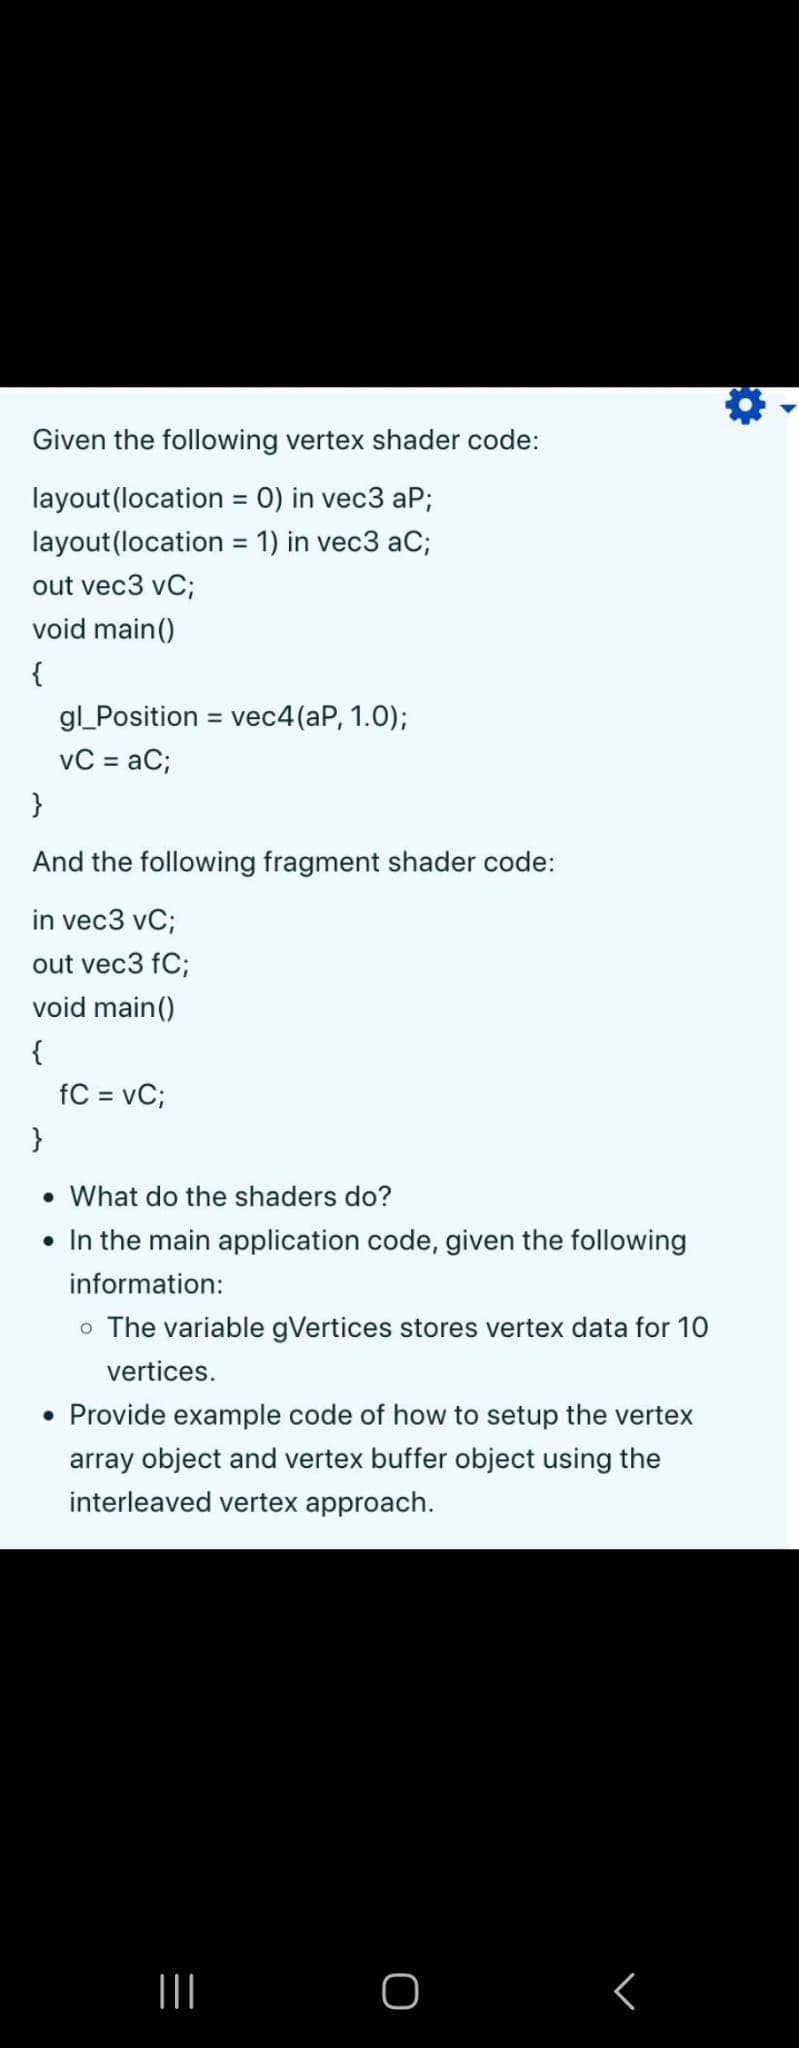 Given the following vertex shader code:
layout(location = 0) in vec3 aP;
layout(location
= 1) in vec3 aC;
out vec3 vC;
void main()
{
gl_Position = vec4(aP, 1.0);
vC = aC;
}
And the following fragment shader code:
in vec3 vC;
out vec3 fC;
void main()
{
fC = vC;
}
• What do the shaders do?
• In the main application code, given the following
information:
o The variable gVertices stores vertex data for 10
vertices.
• Provide example code of how to setup the vertex
array object and vertex buffer object using the
interleaved vertex approach.
|||
O
<